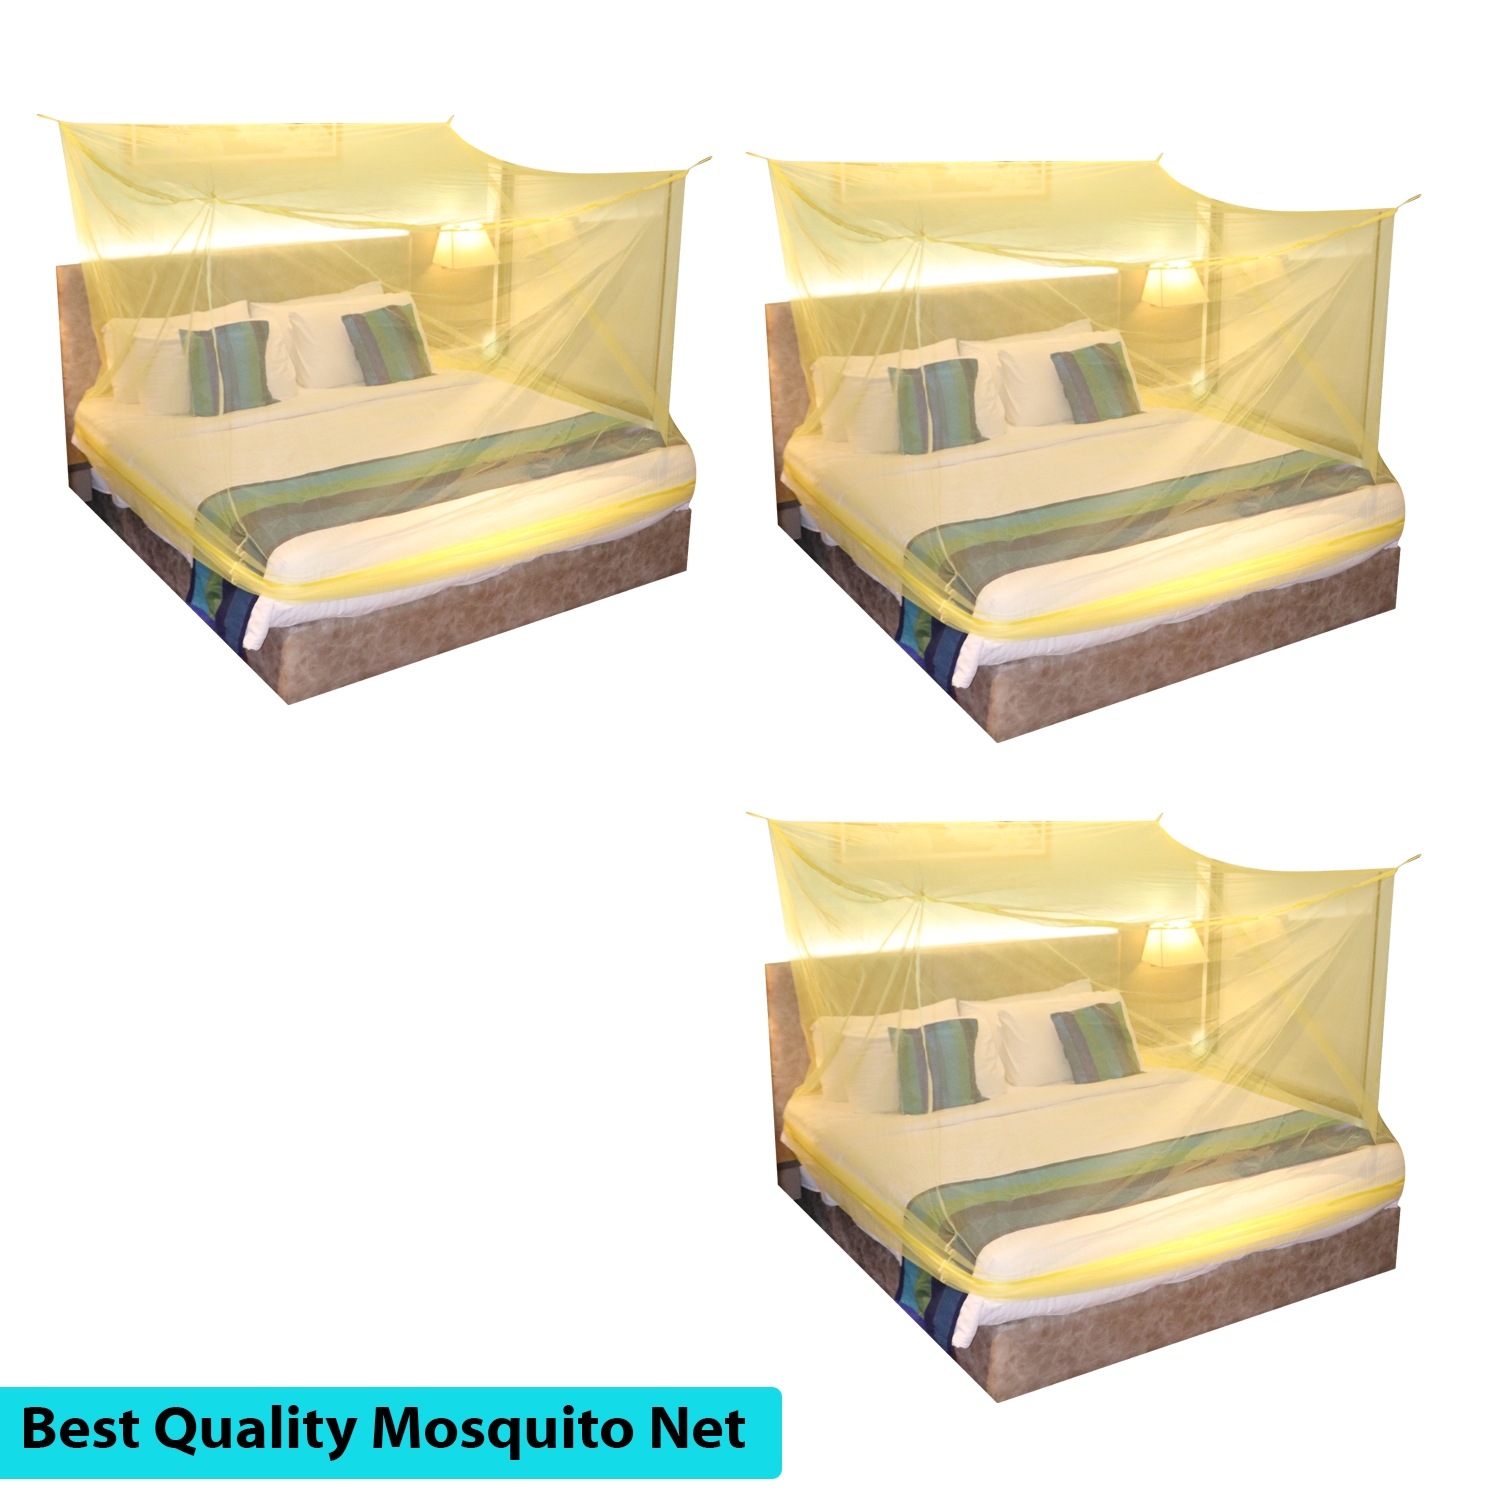 SILVER SHINE | Mosquito Net for Double Bed, King-Size, Square Hanging Foldable Polyester Net YellowPack of 3 0